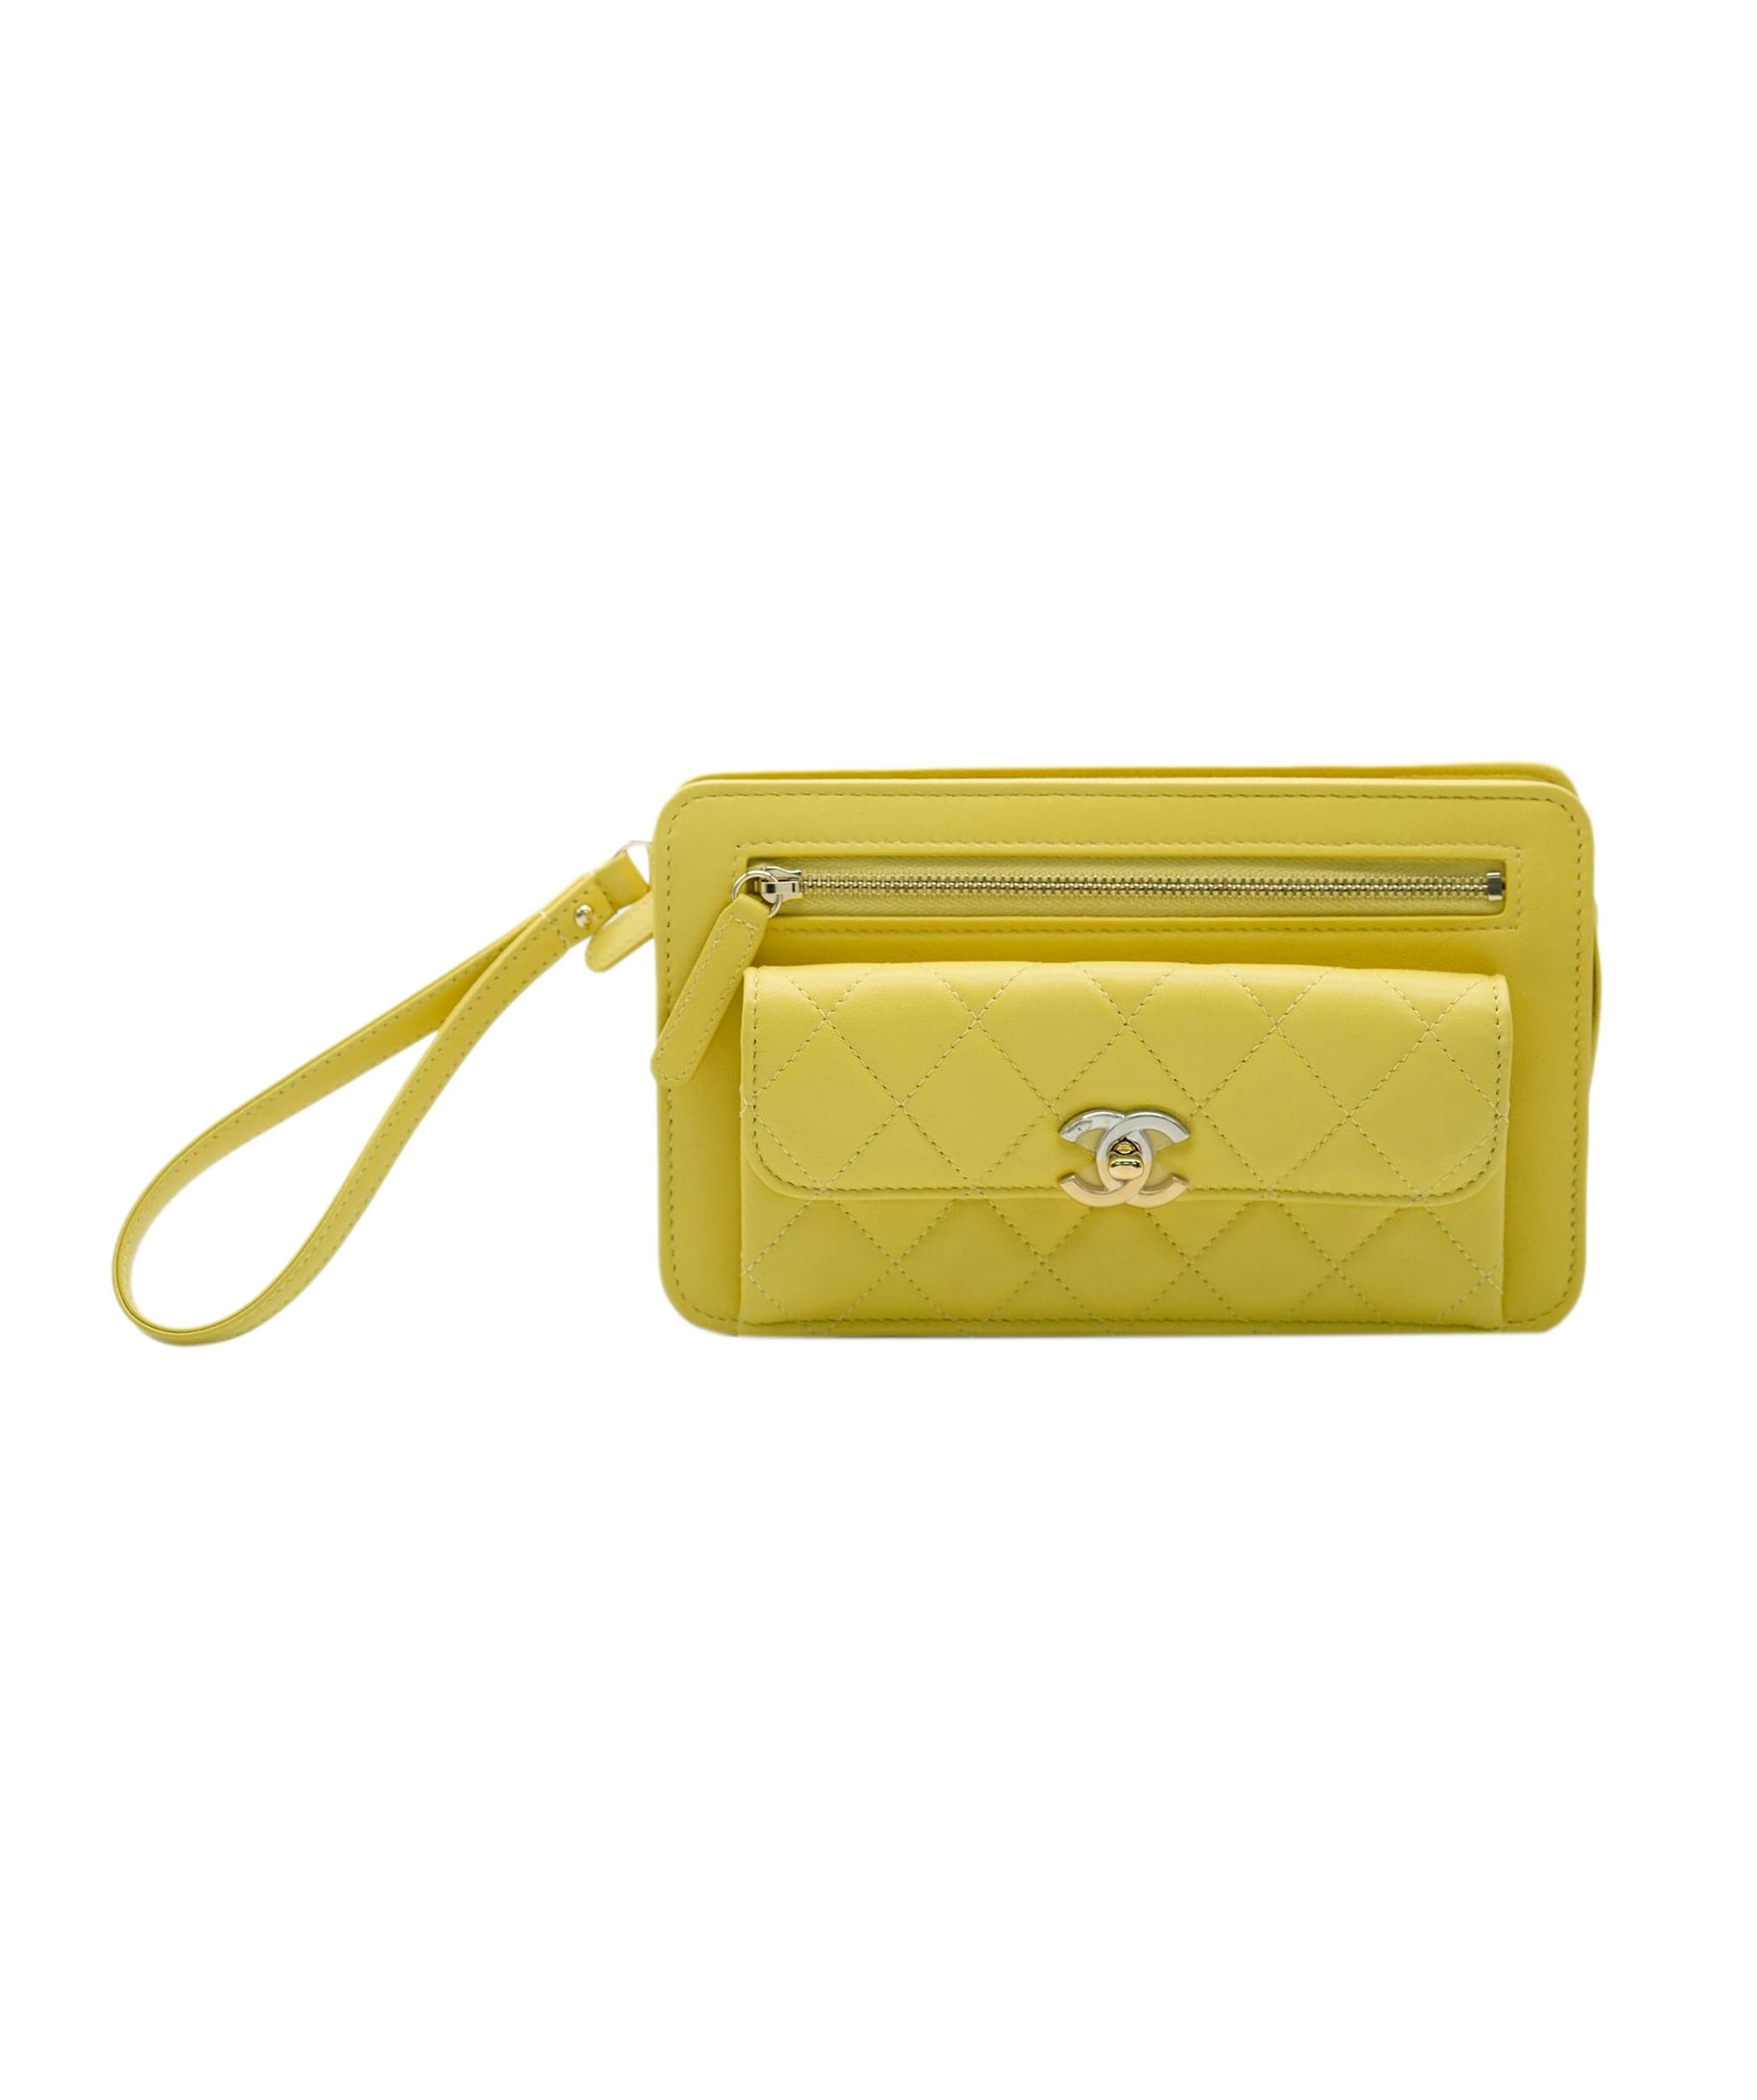 Chanel Chanel Yellow Quilted Wristlet ASC2301